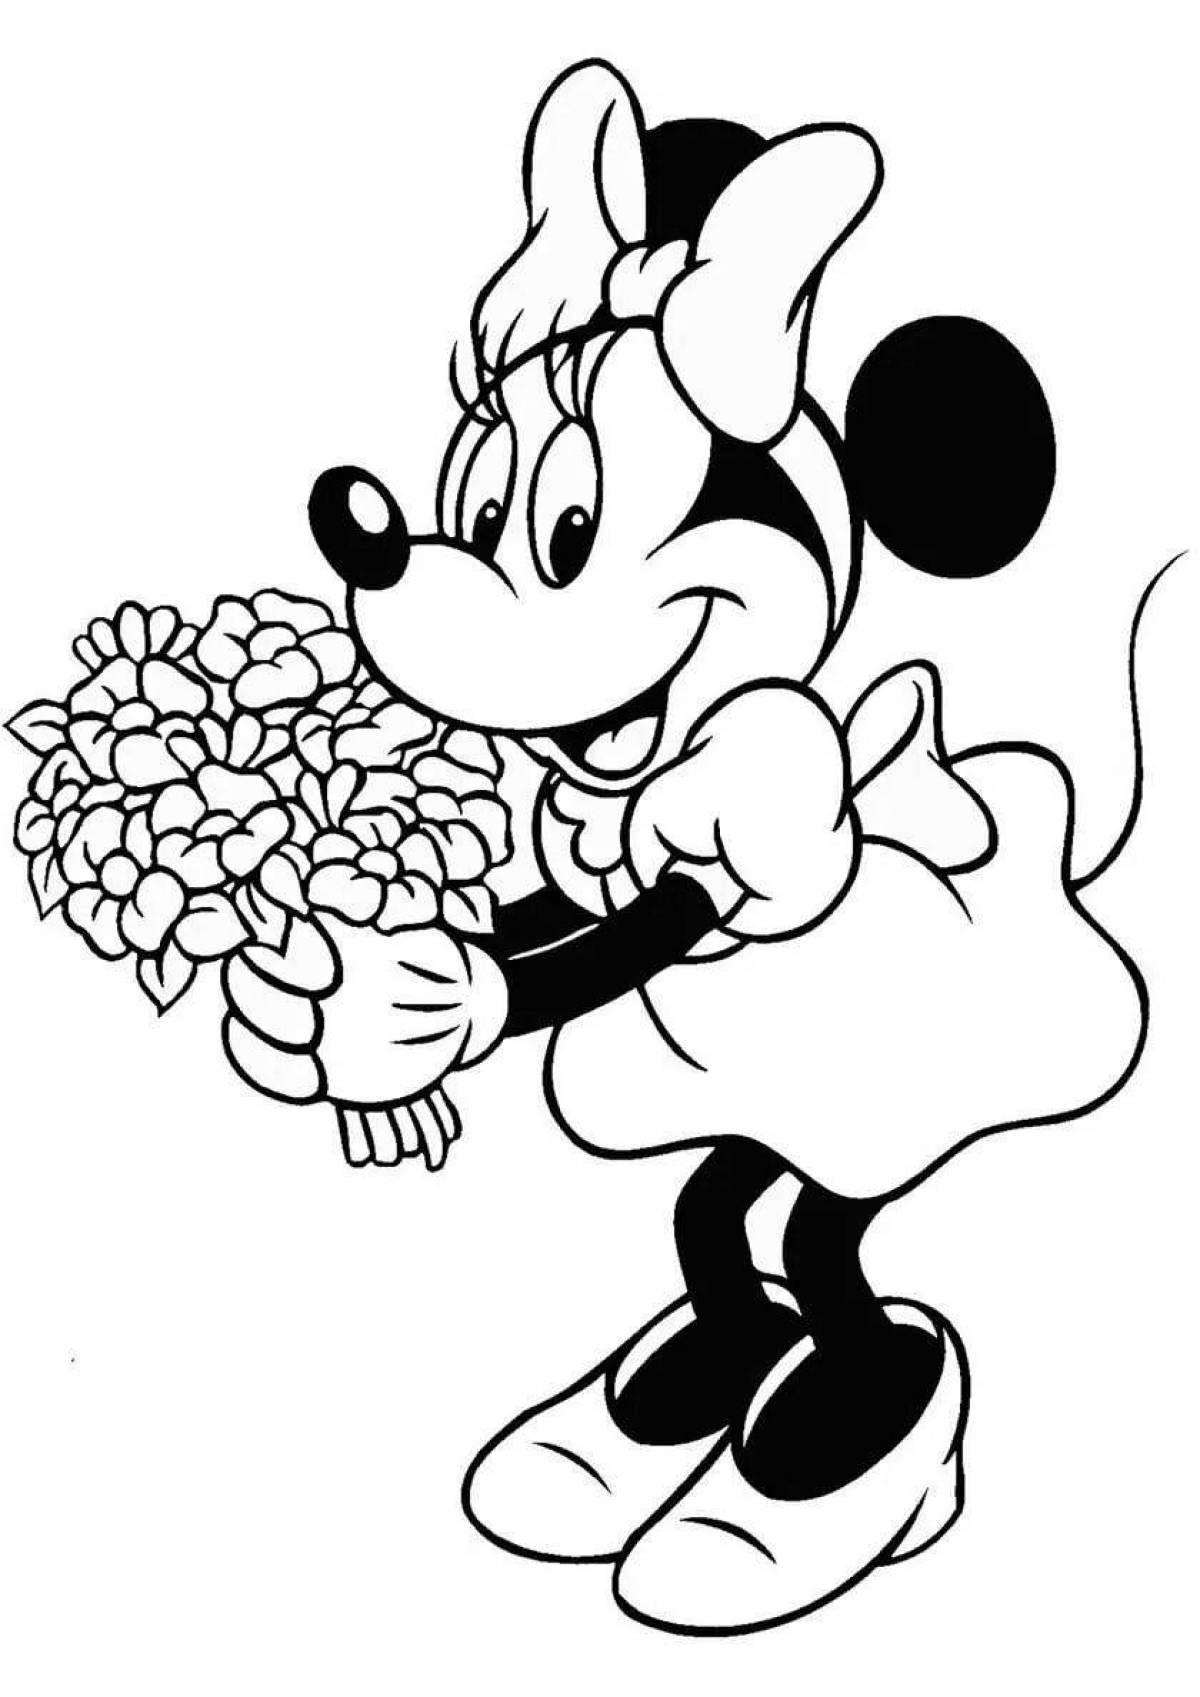 Delightful minnie mouse coloring book for kids